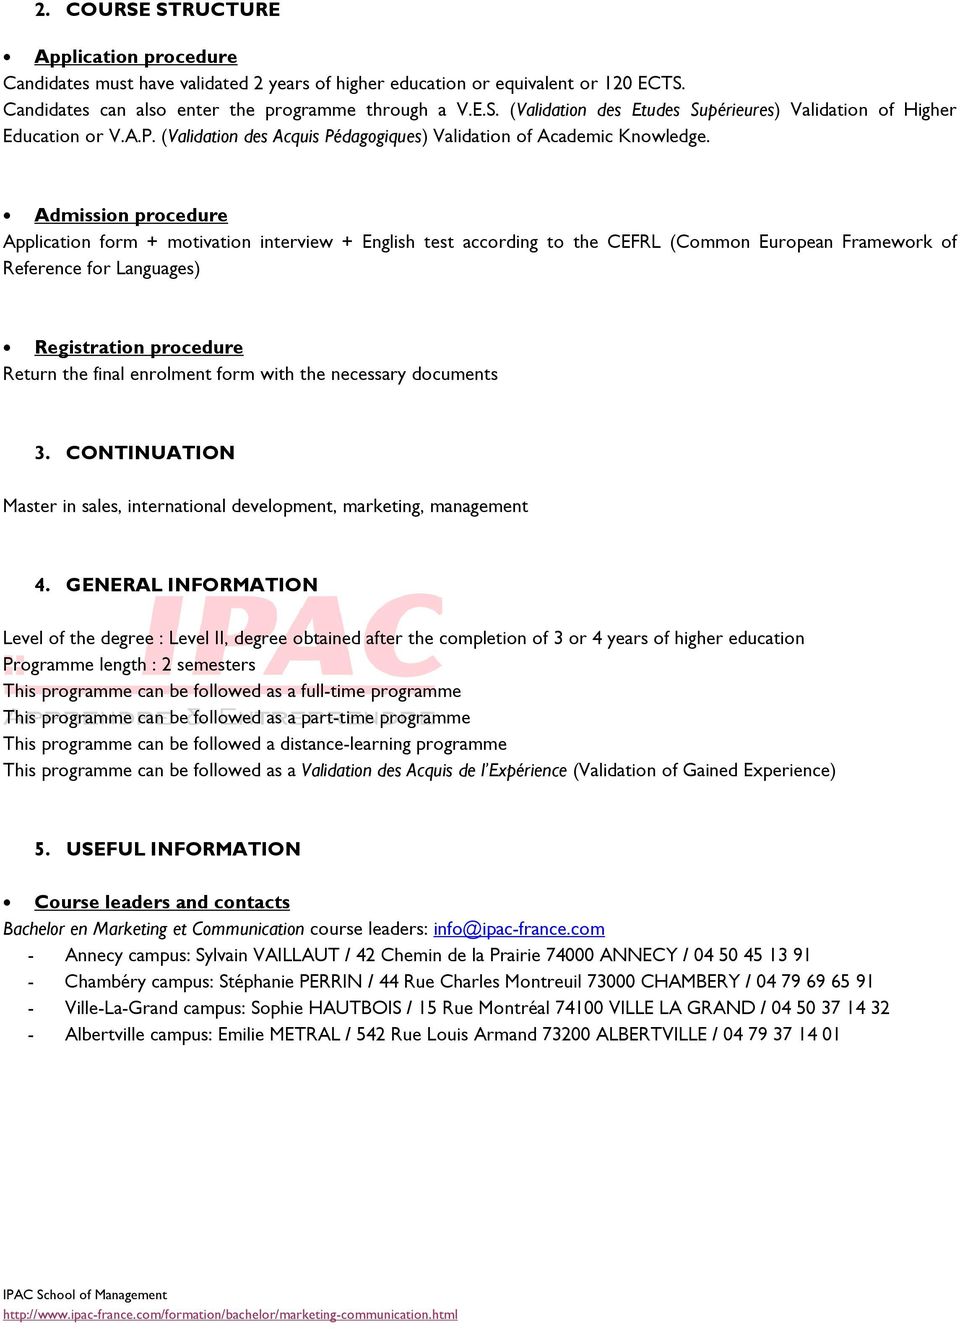 Admission procedure Application form + motivation interview + English test according to the CEFRL (Common European Framework of Reference for Languages) Registration procedure Return the final